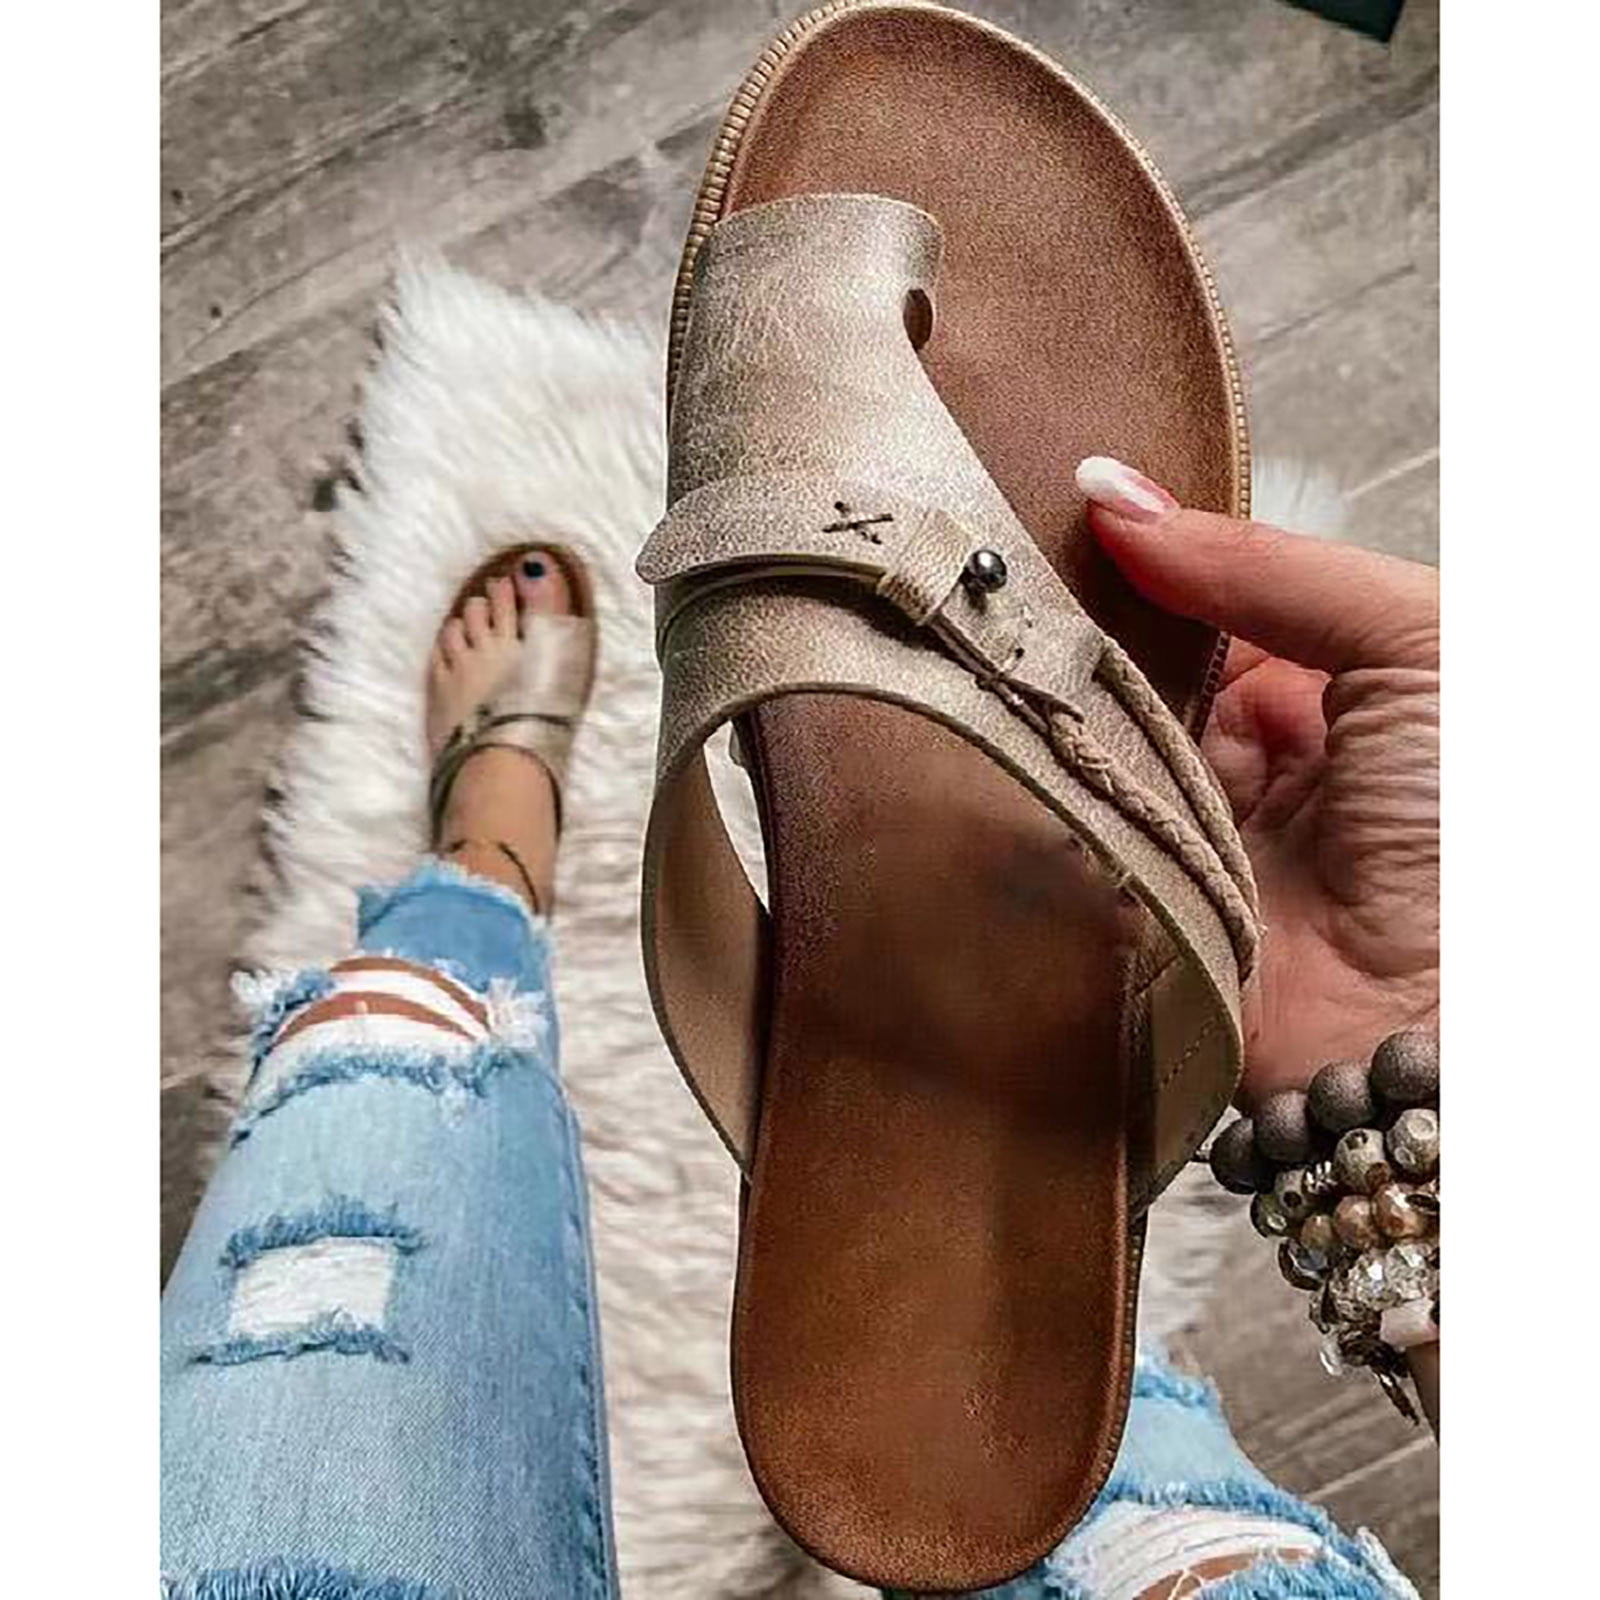 Flat Sandals For Women Comfort Sole PU Leather Shoes Casual Soft